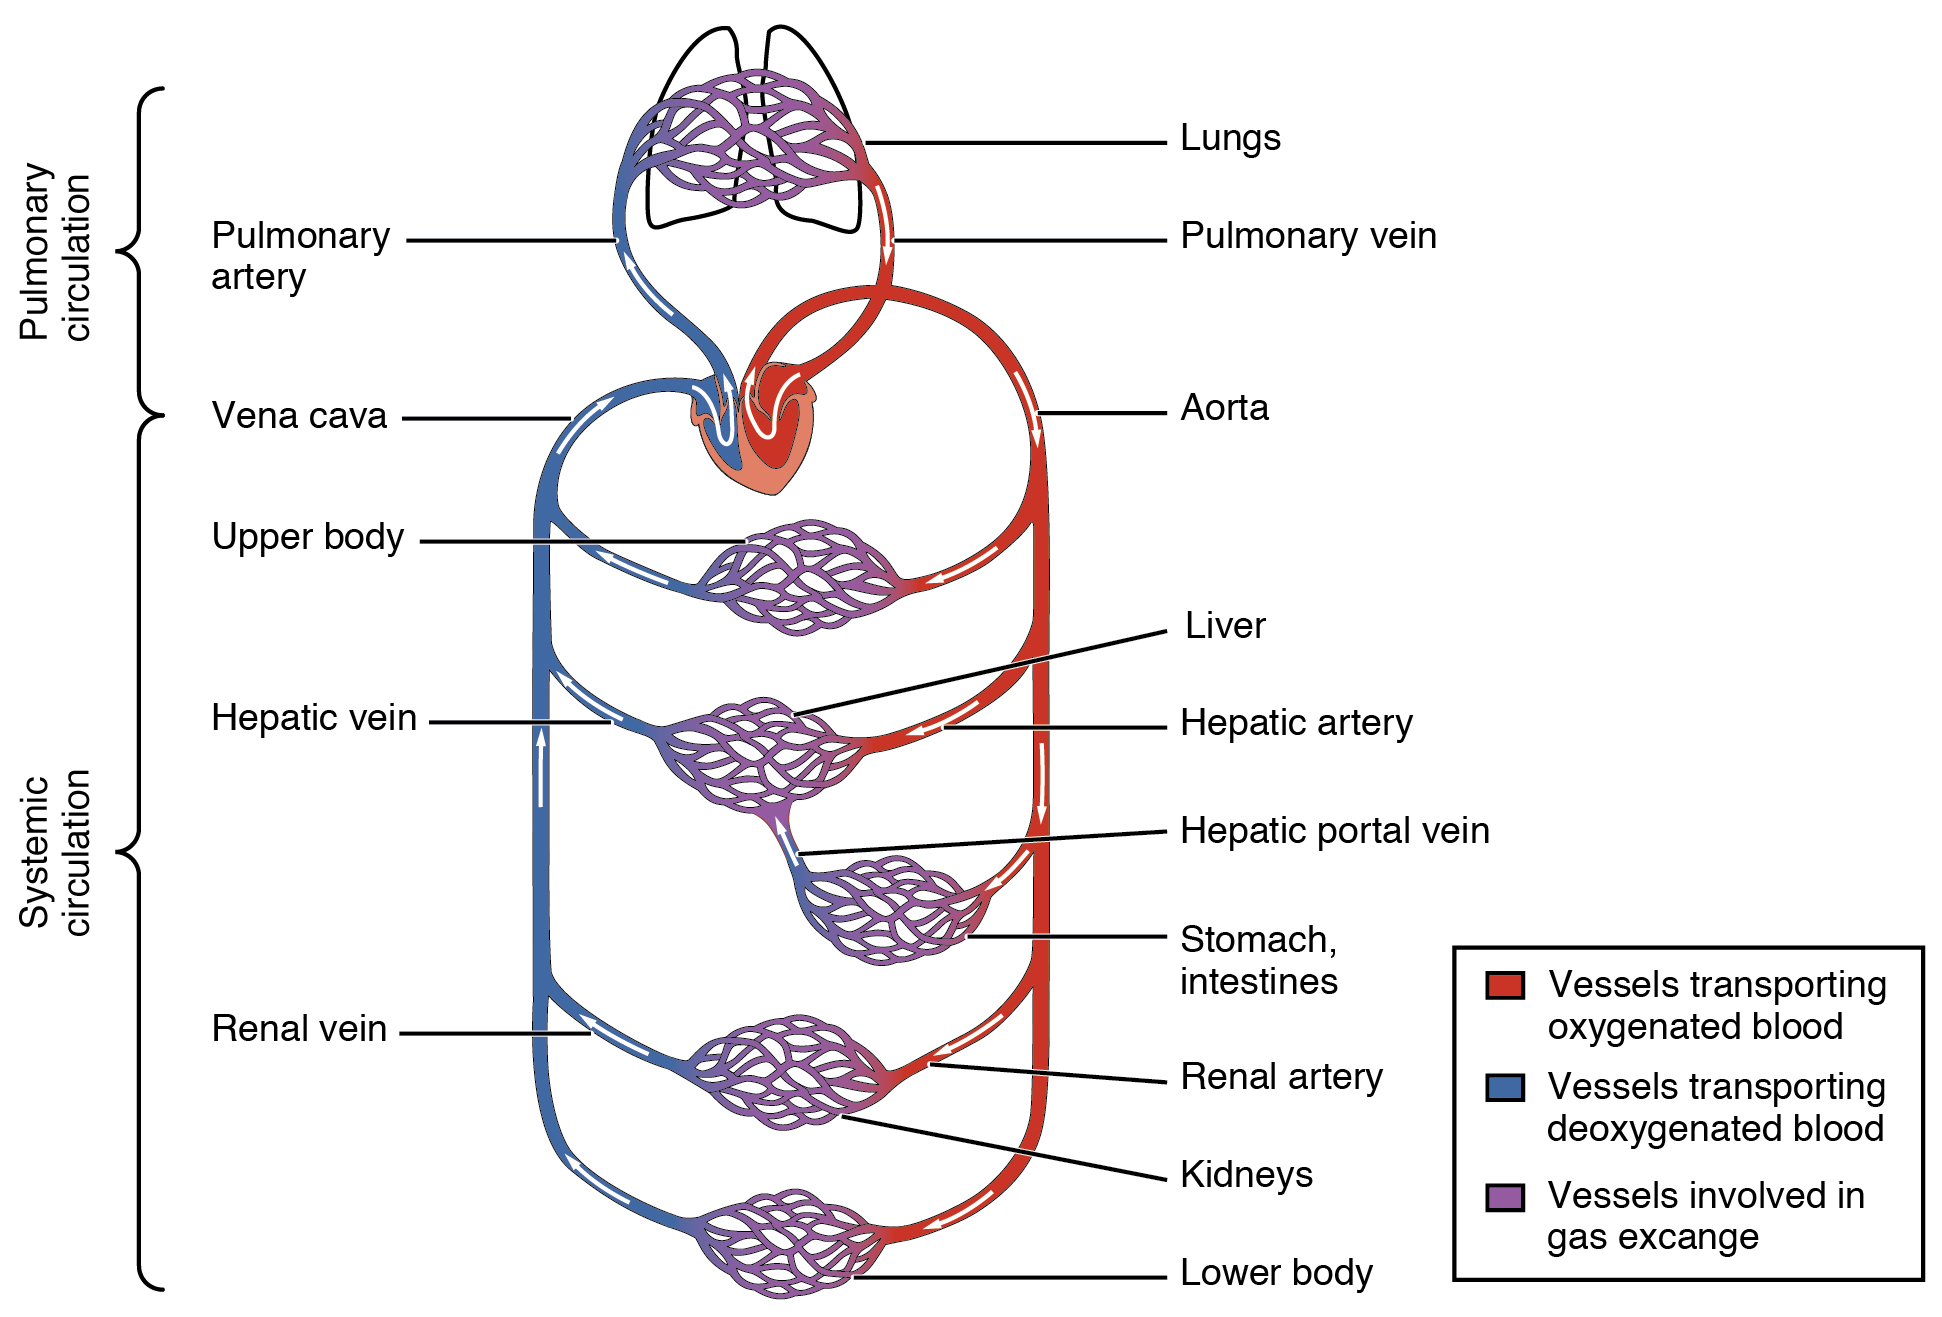 This diagram shows how oxygenated and deoxygenated blood flow through the major organs in the body. On the right of the image is the arterial flow, represented as leaving the heart to the major organs capillary beds (lungs, liver, GI, kidneys, lower body).  The venous flow is on the left of the image, represented by blue.  All venous flow return the right heart which then leaves for the lungs, returning to heart via pulmonary vein (on the right of image since it's oxygenated blood)